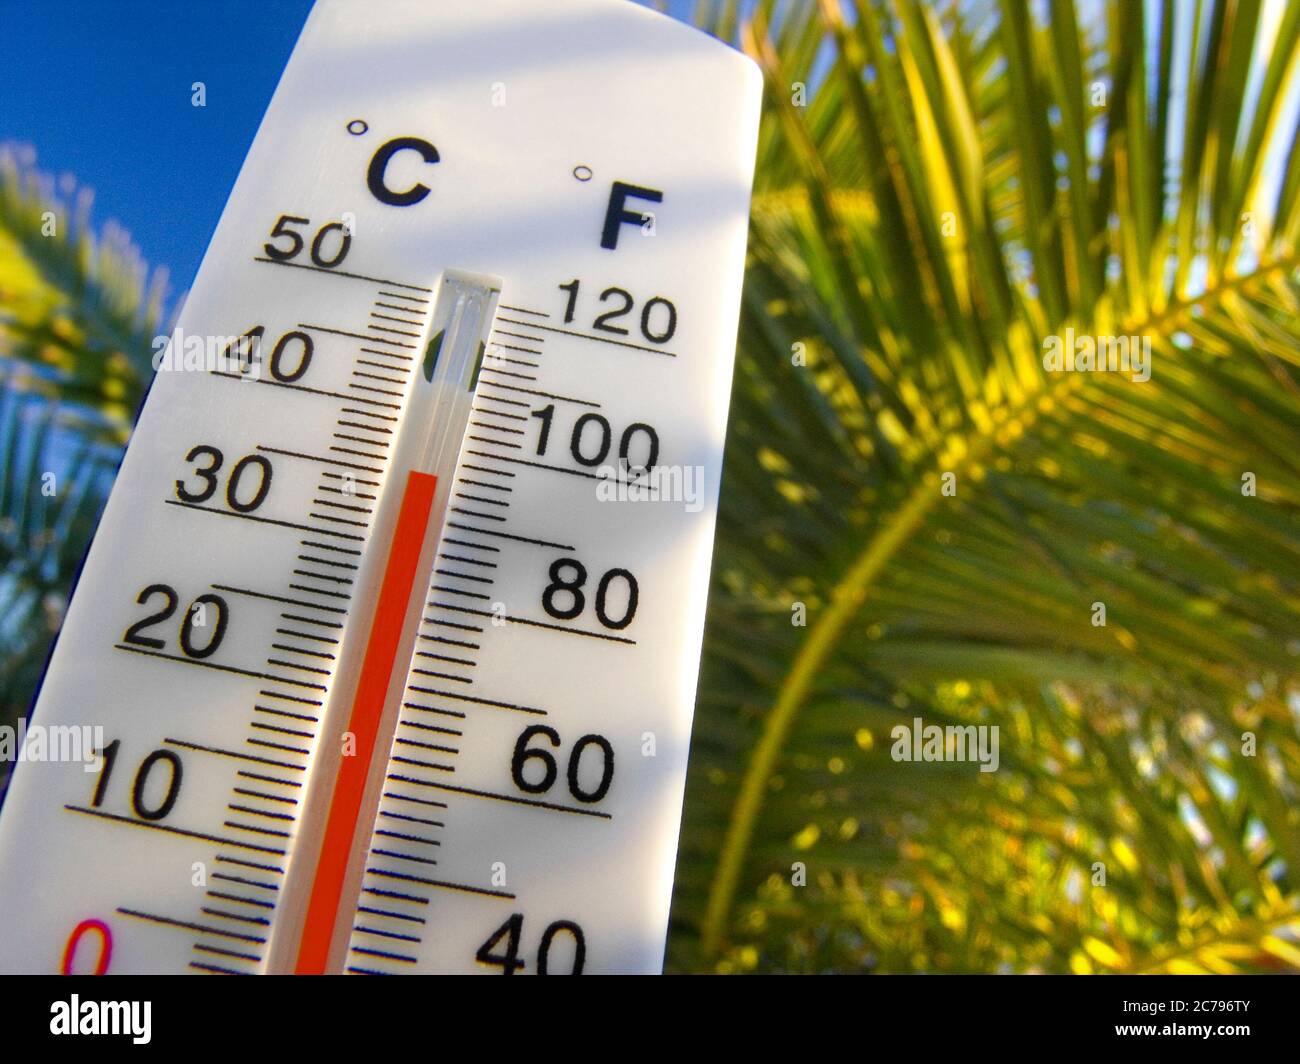 Temperature 36C Gauge Thermometer Display Holiday Sun Vacation temperature weather Thermometer displays an ideal warm and sunny 36C degrees centigrade 93F Fahrenheit against a vacation holiday sunny exotic palm tree and blue sky background Stock Photo